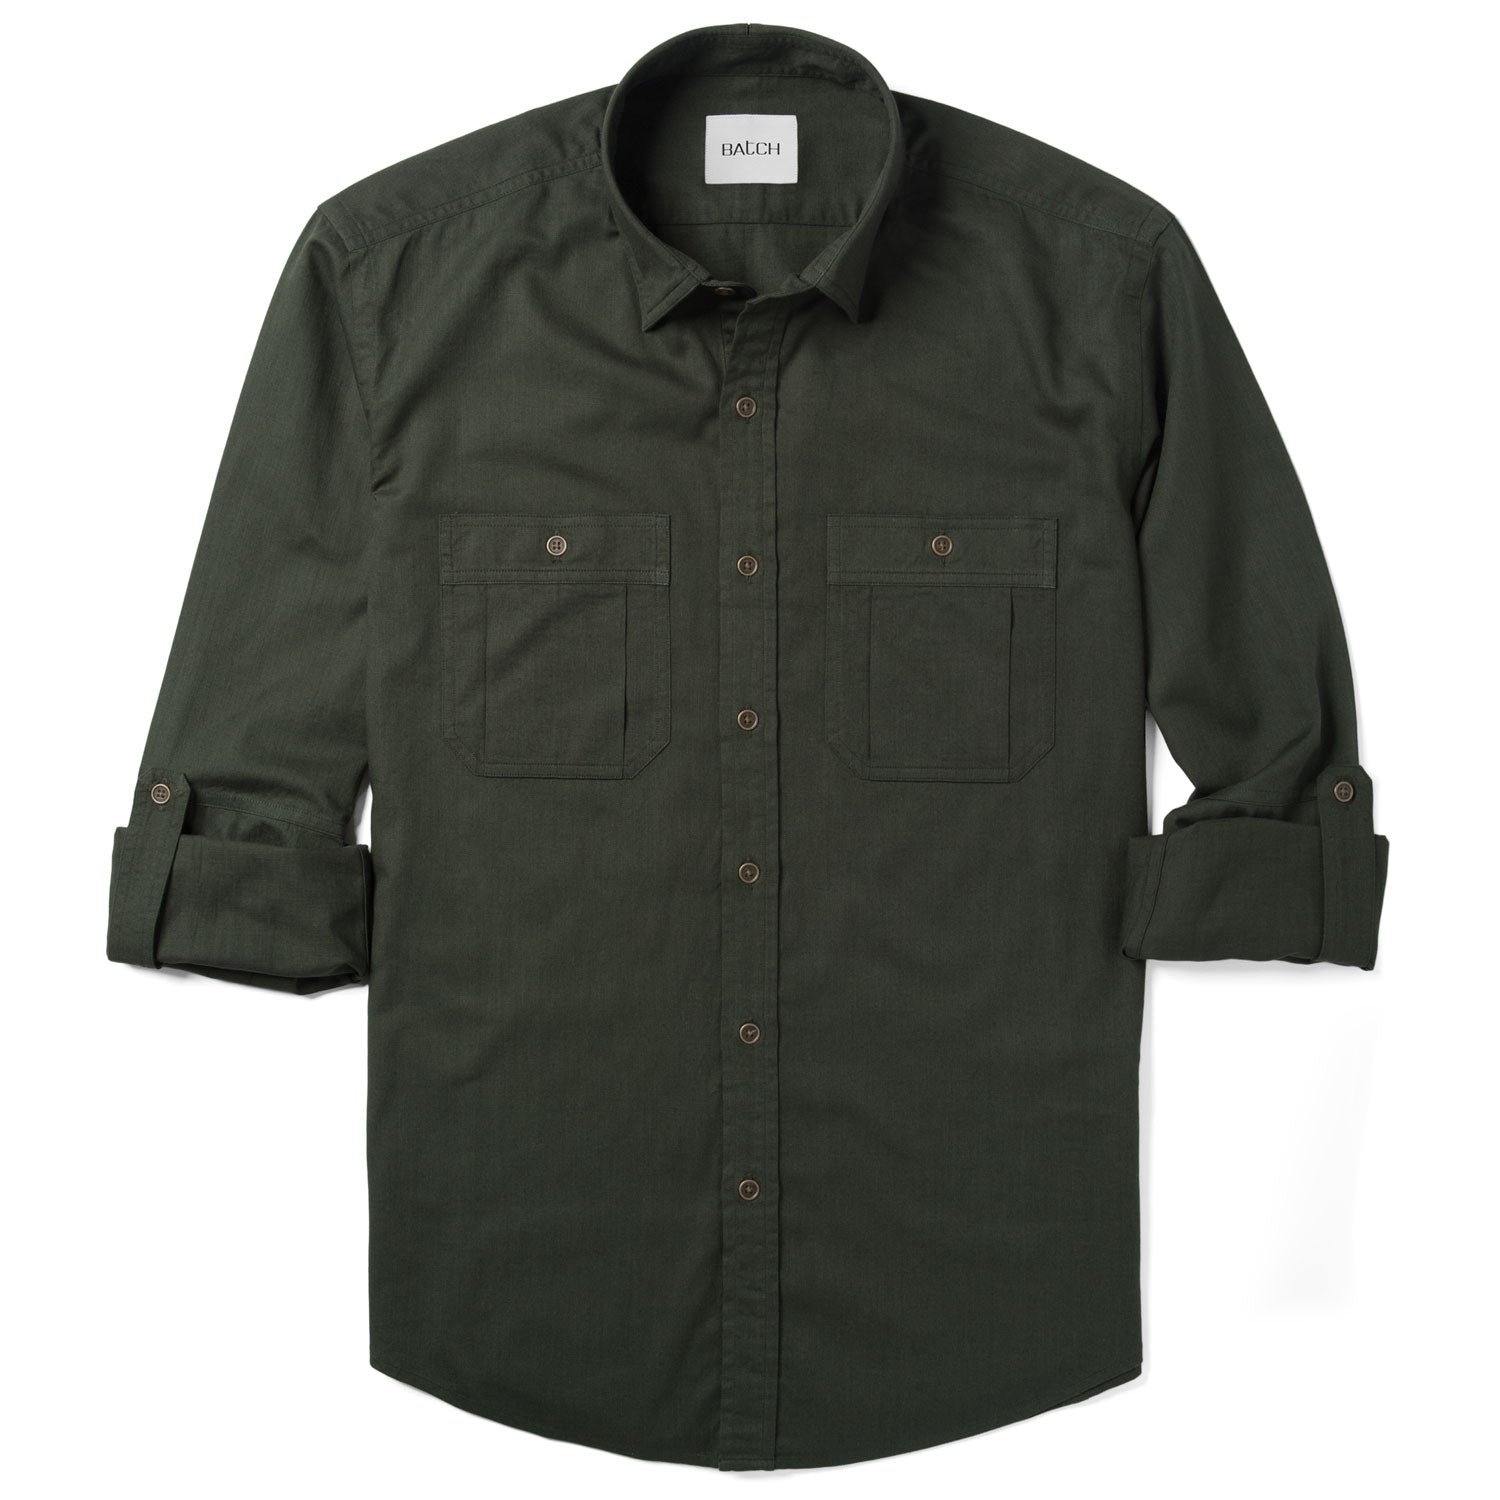 Men's Utility Shirt - Fixer in Olive Green Cotton Twill